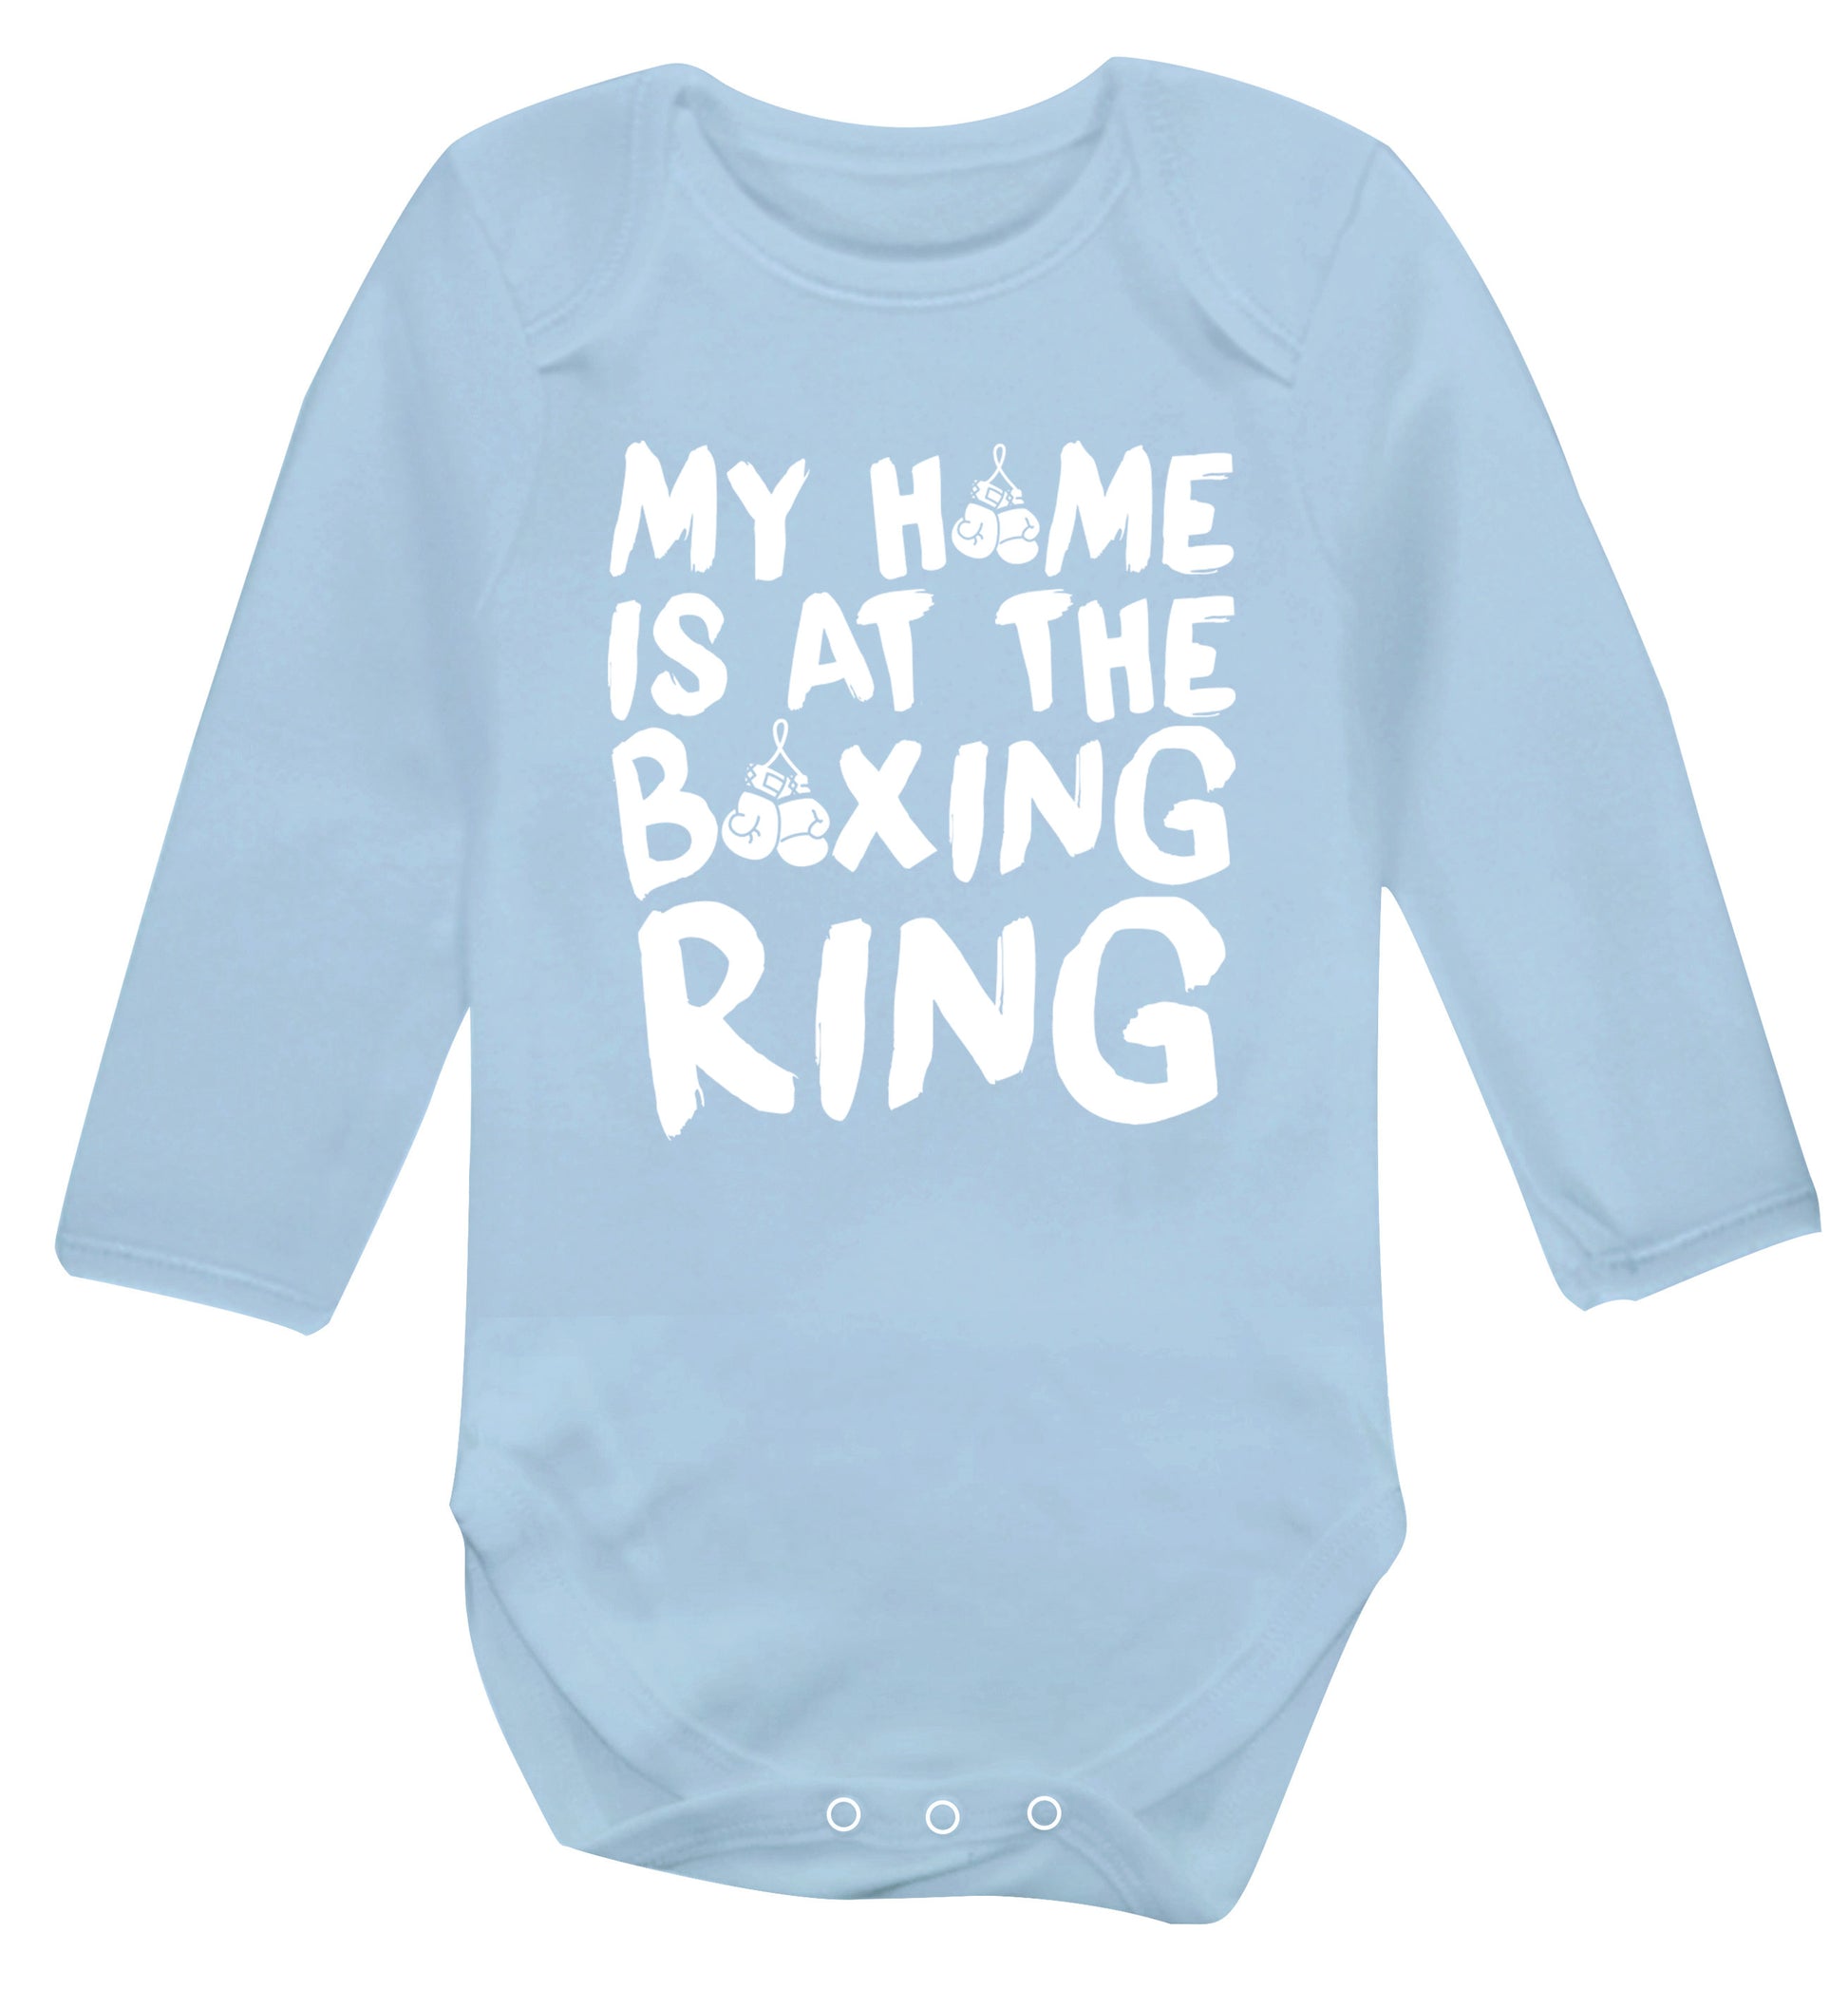 My home is at the boxing ring Baby Vest long sleeved pale blue 6-12 months